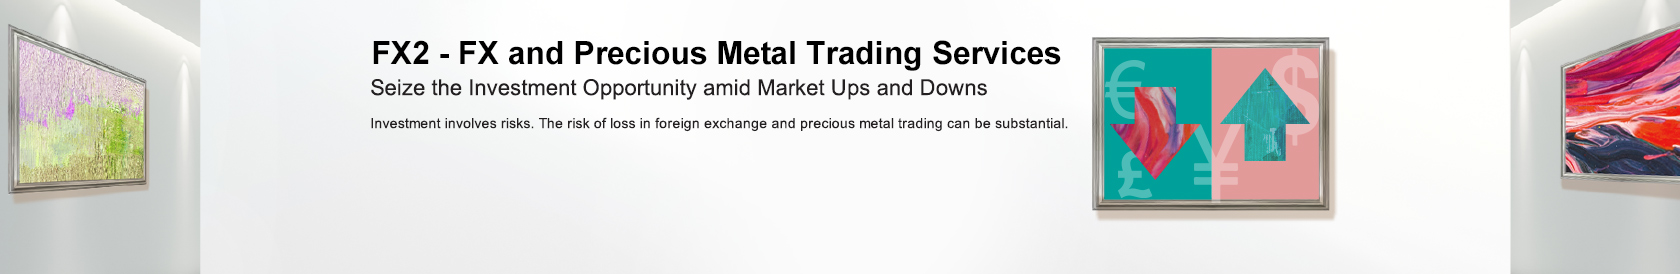 FX2 - FX and Precious Metal Trading Services